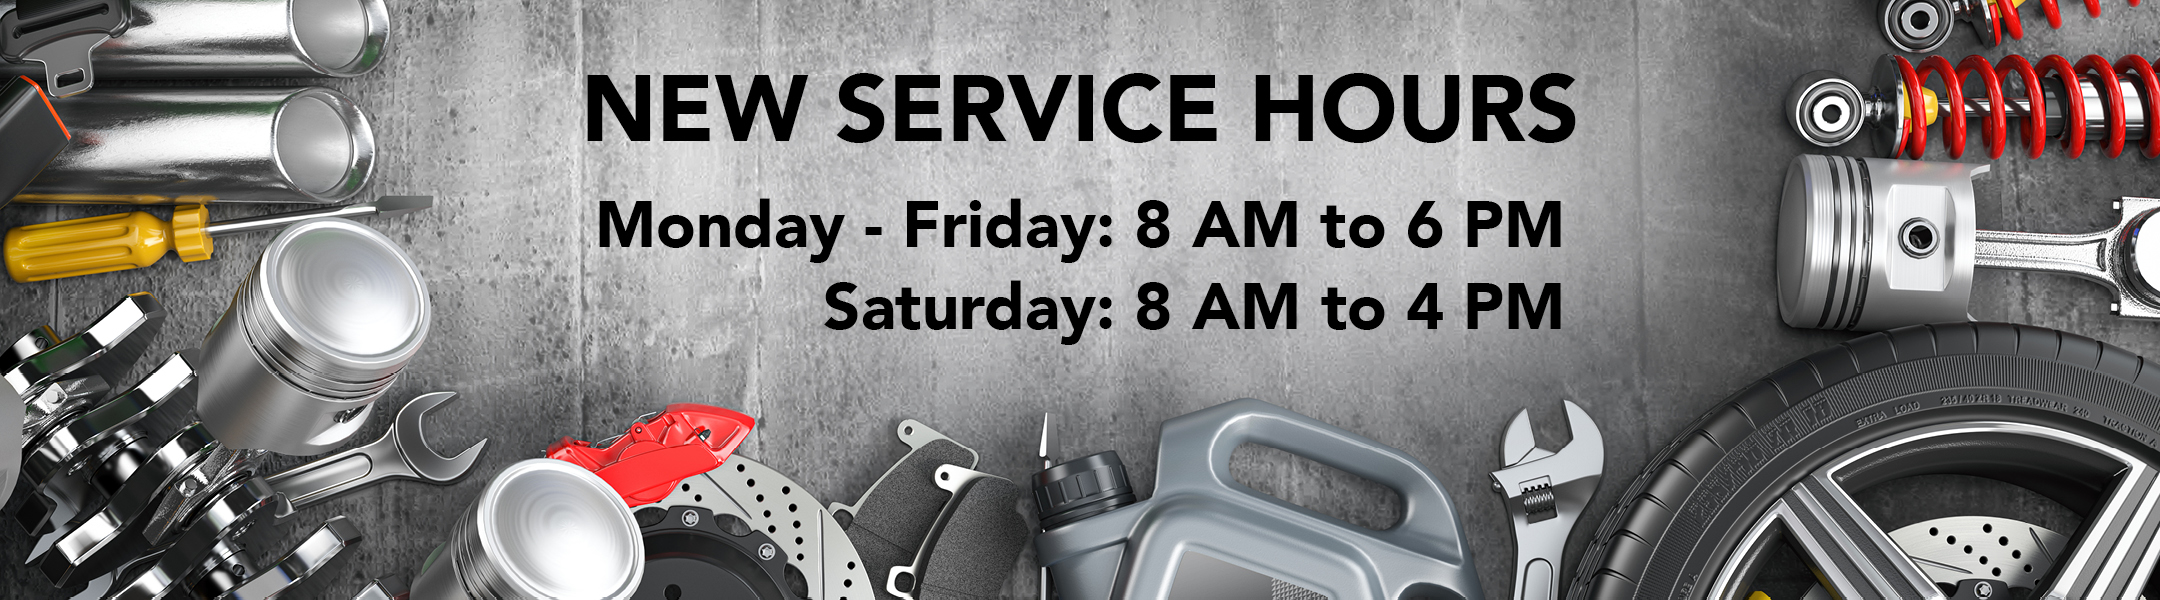 New Service Hours